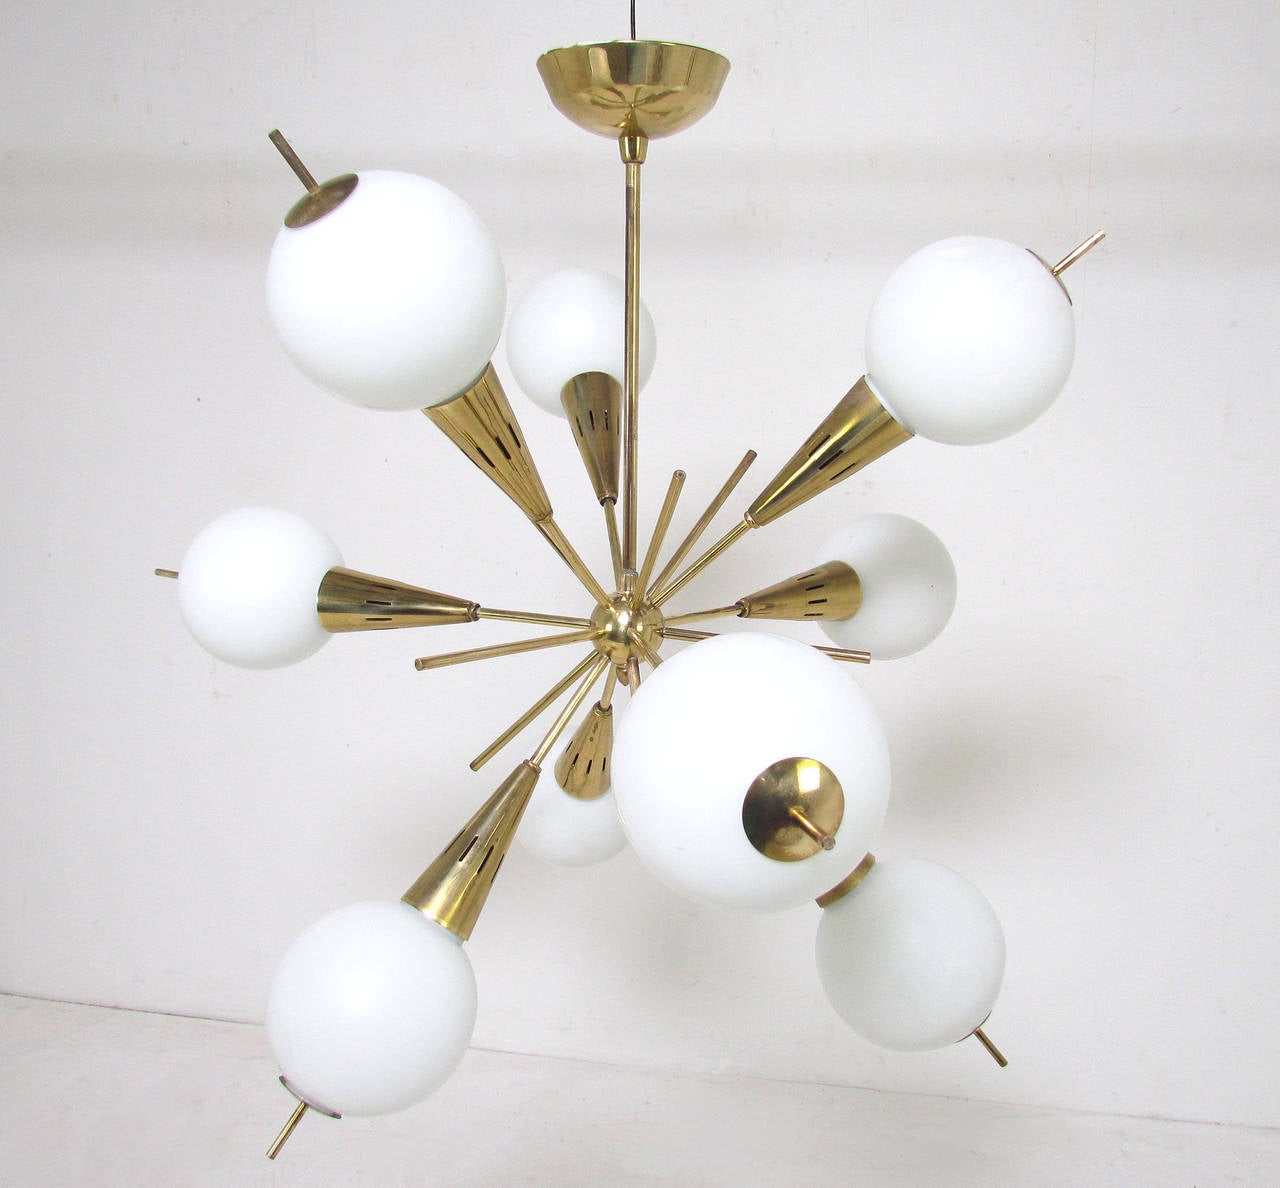 Rare form mid-century modern chandelier, circa 1960s with unusual pierced globes, a form often attributed to Stilnovo. Nine cone shaped brass arms with illuminated glass globes and brass end caps, and emanating decorative brass rods.